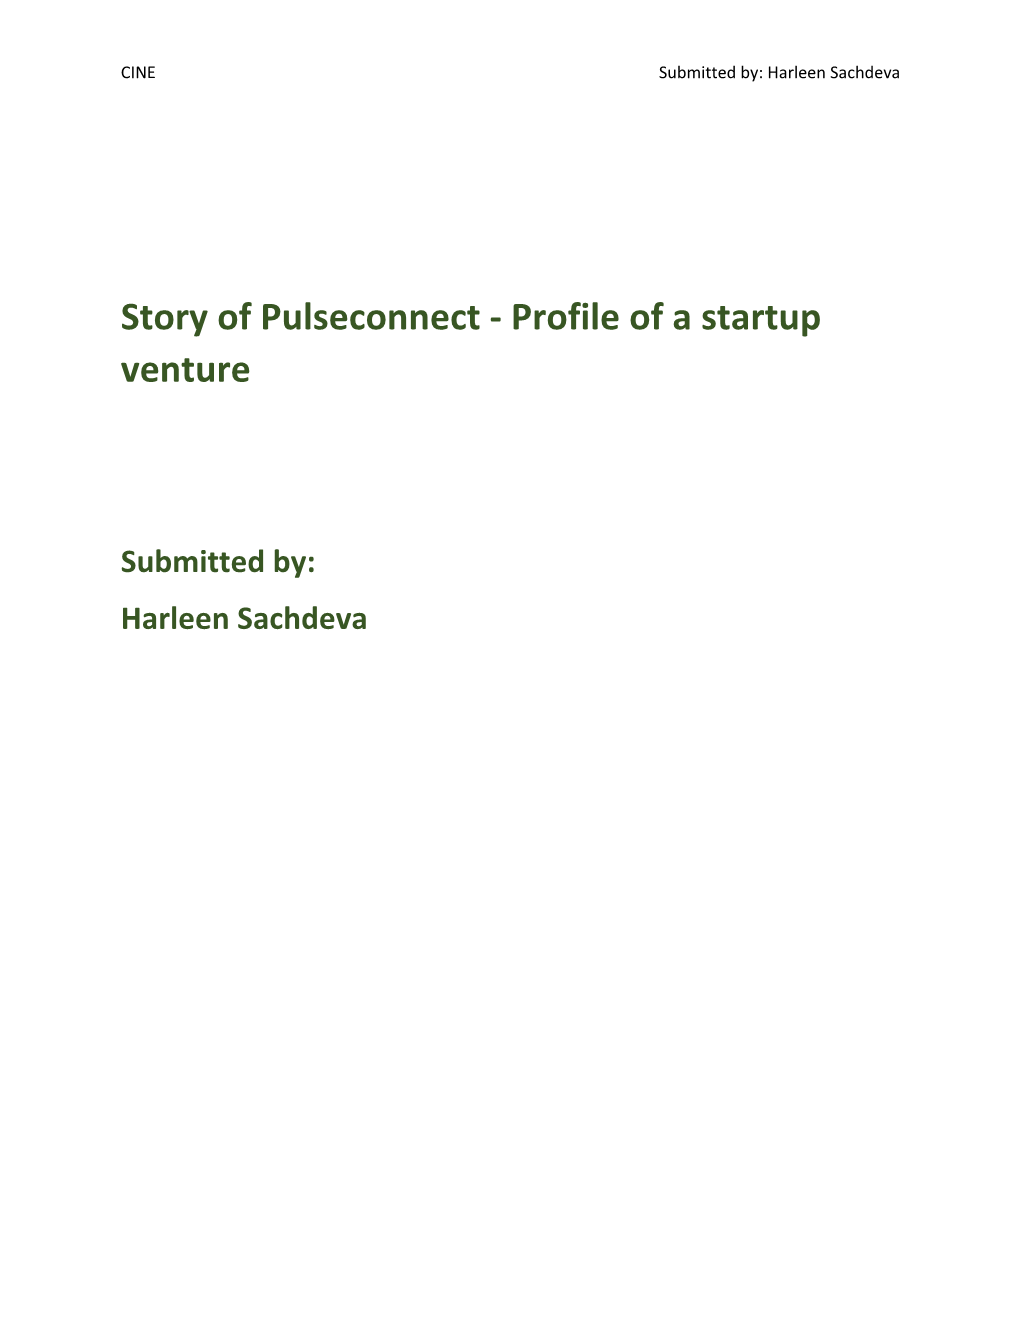 Story of Pulseconnect - Profile of a Startup Venture